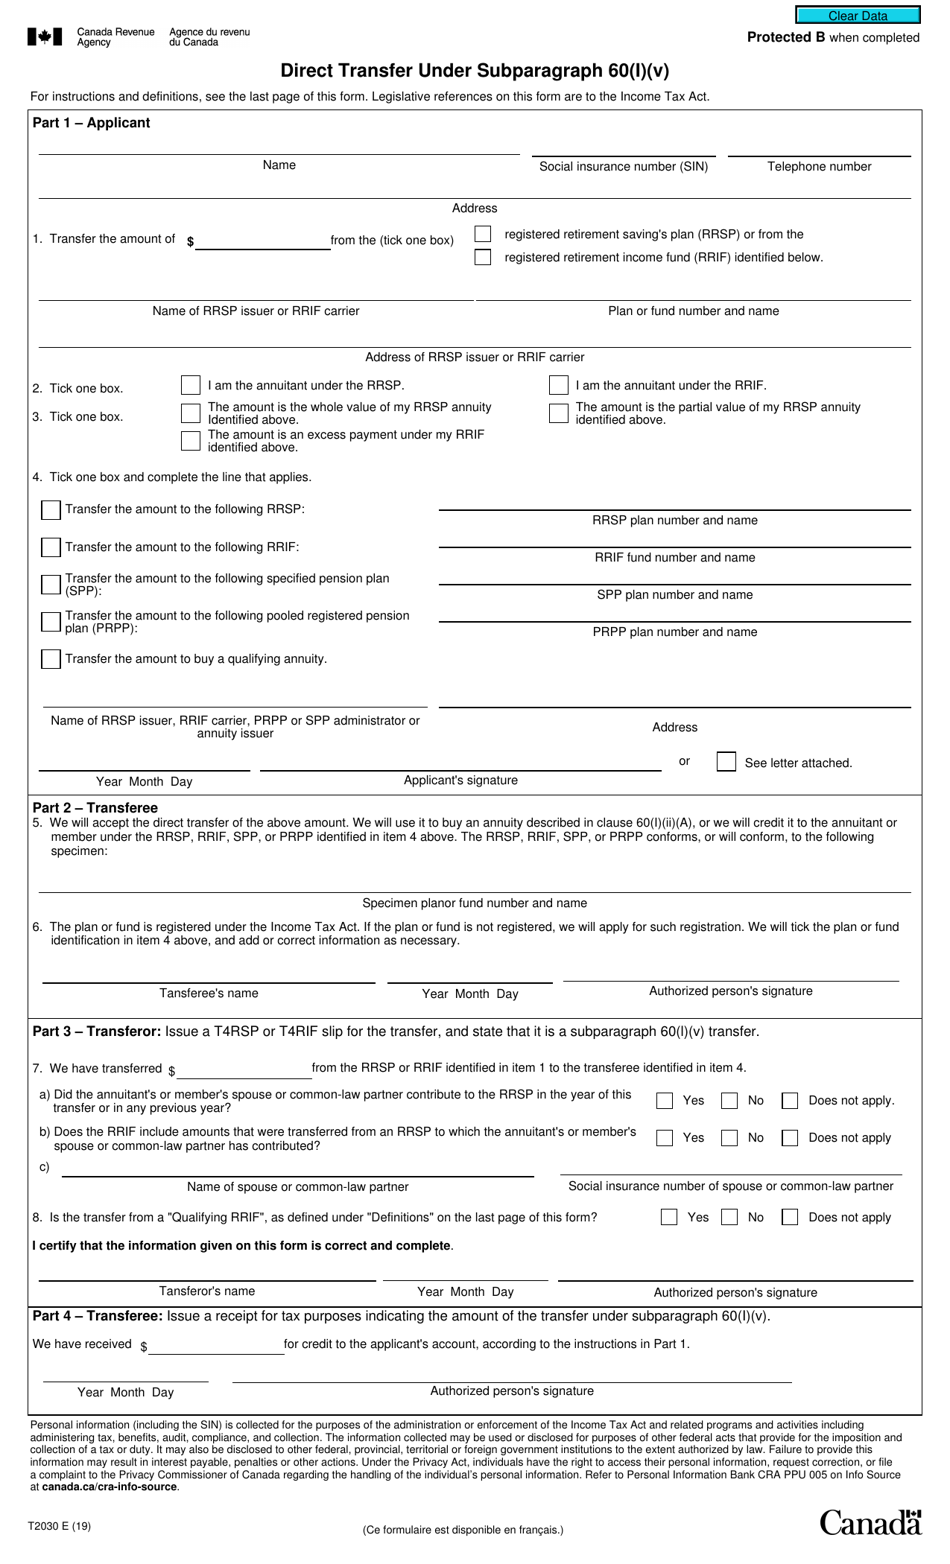 Form T2030 Direct Transfer Under Subparagraph 60(I)(V) - Canada, Page 1